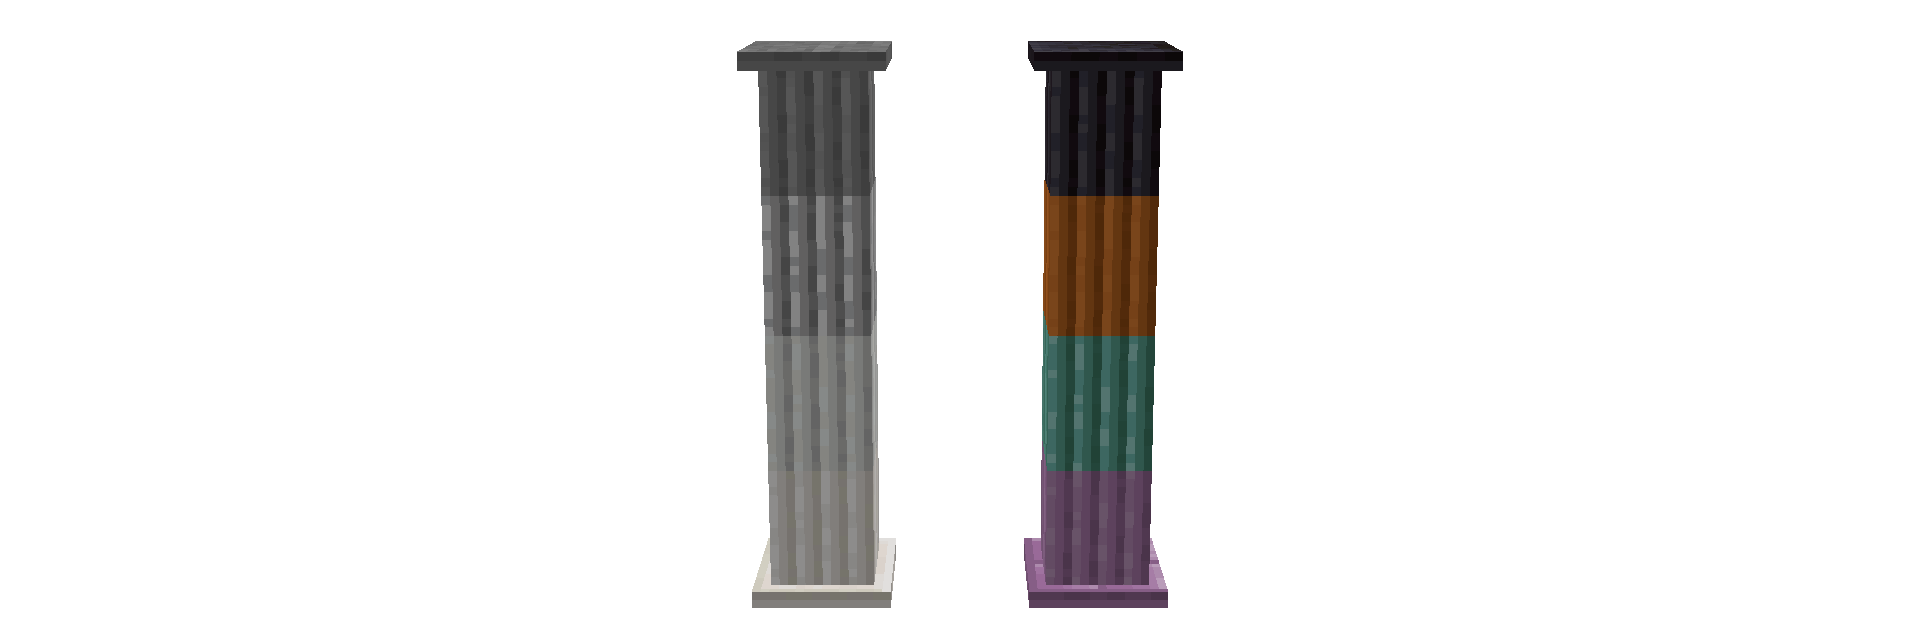 Image of two pillars made up of multiple materials